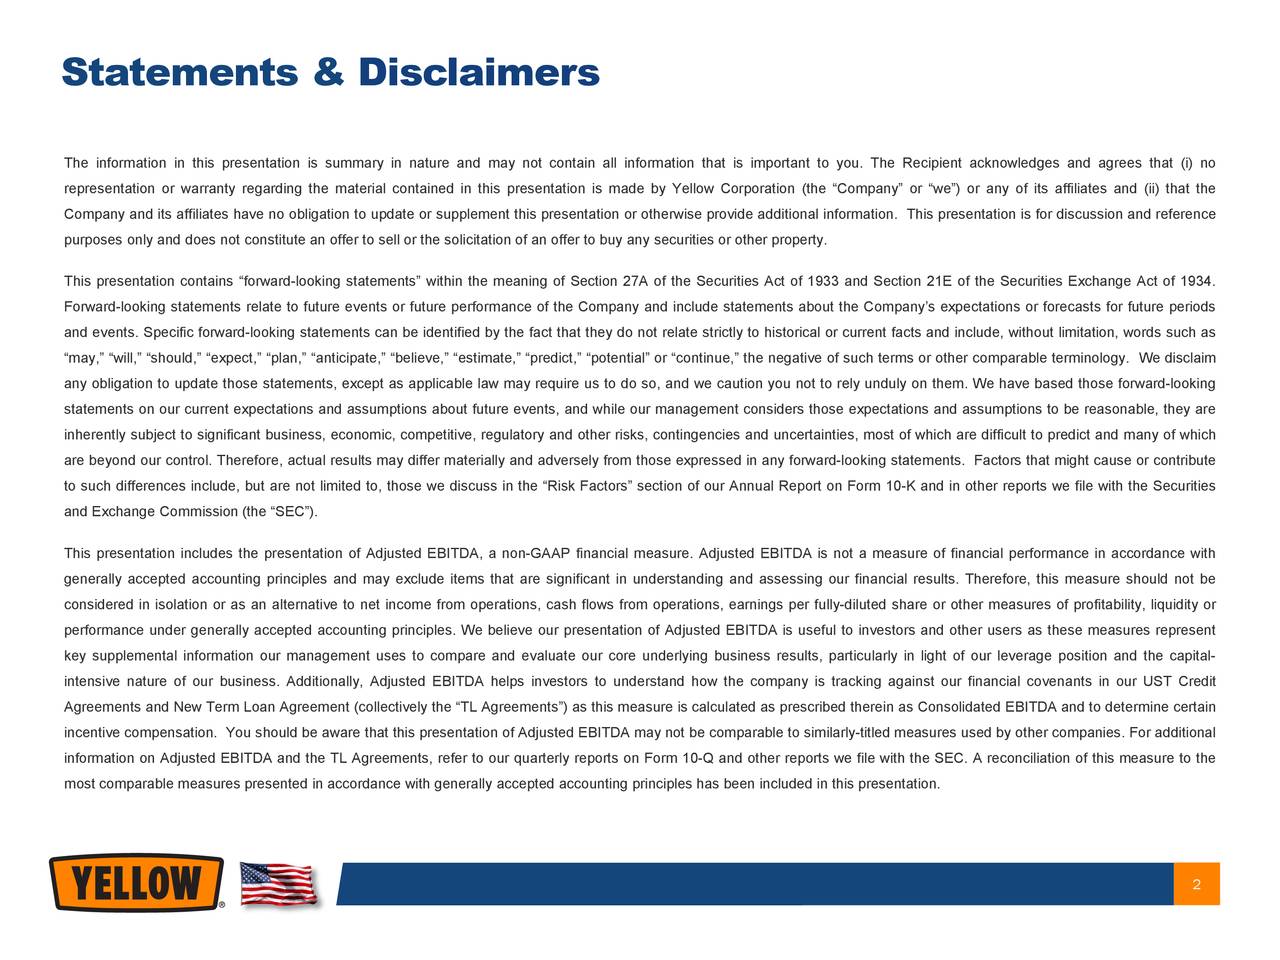 Statements &Disclaimers